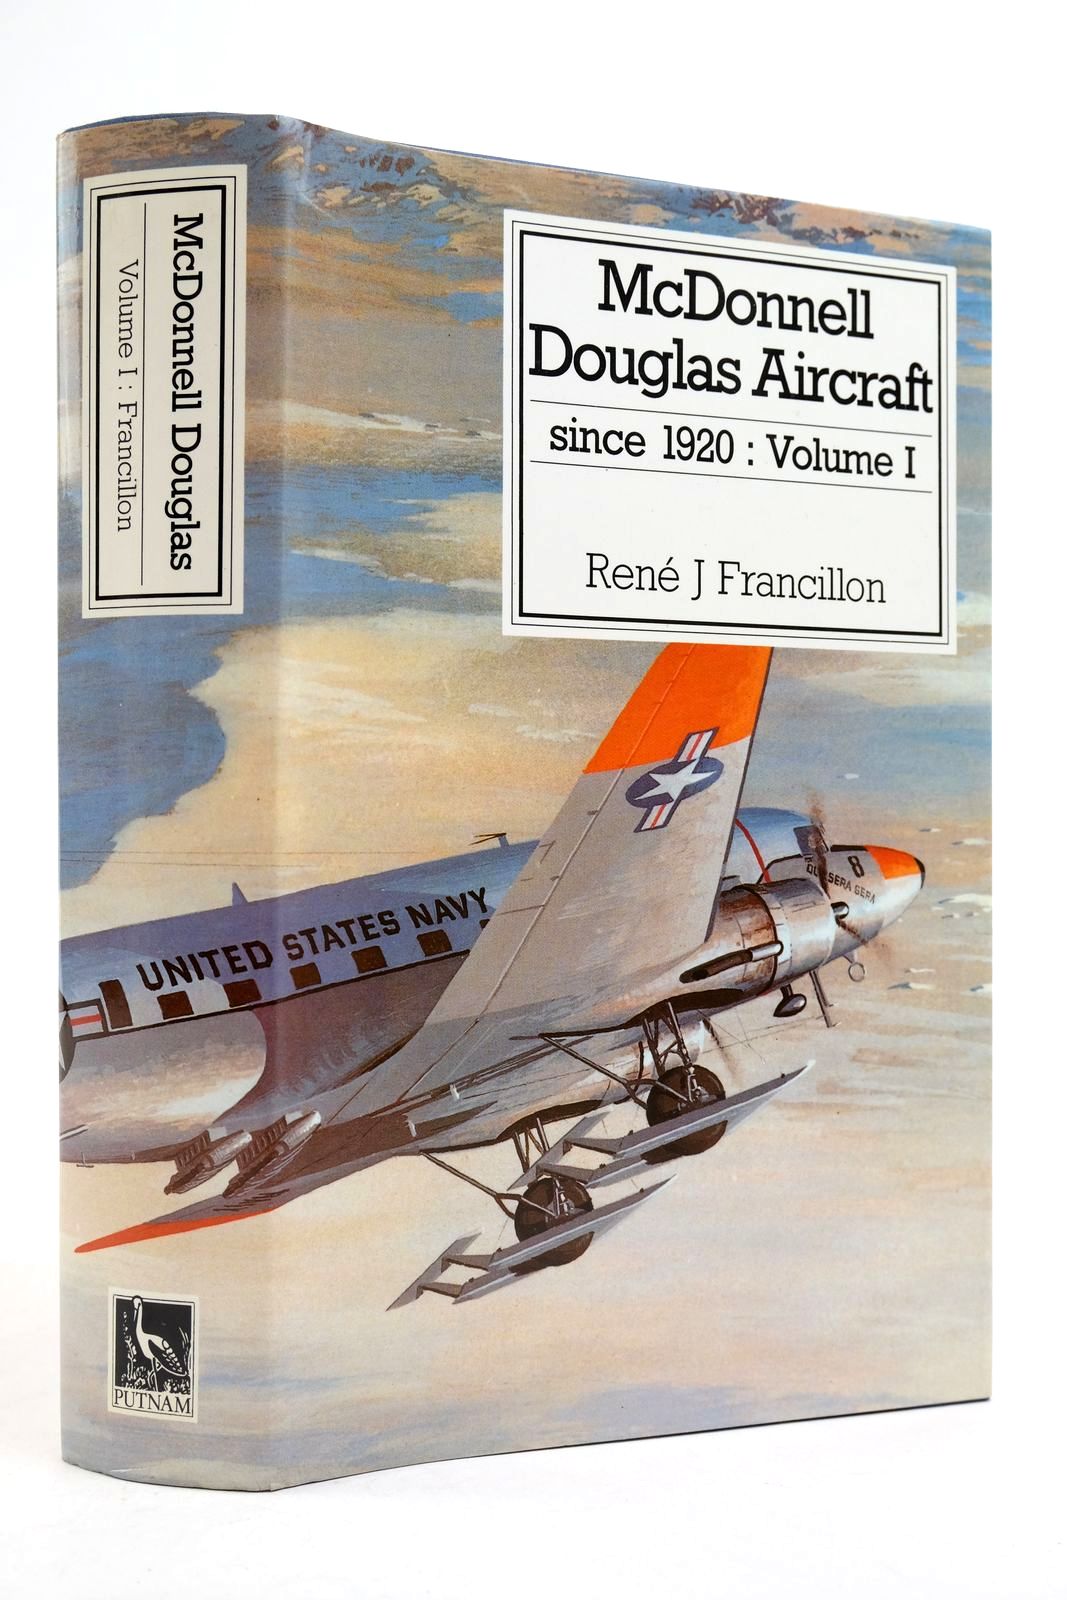 Photo of MCDONNELL DOUGLAS AIRCRAFT SINCE 1920: VOLUME I written by Francillon, Rene J. published by Putnam (STOCK CODE: 2139144)  for sale by Stella & Rose's Books